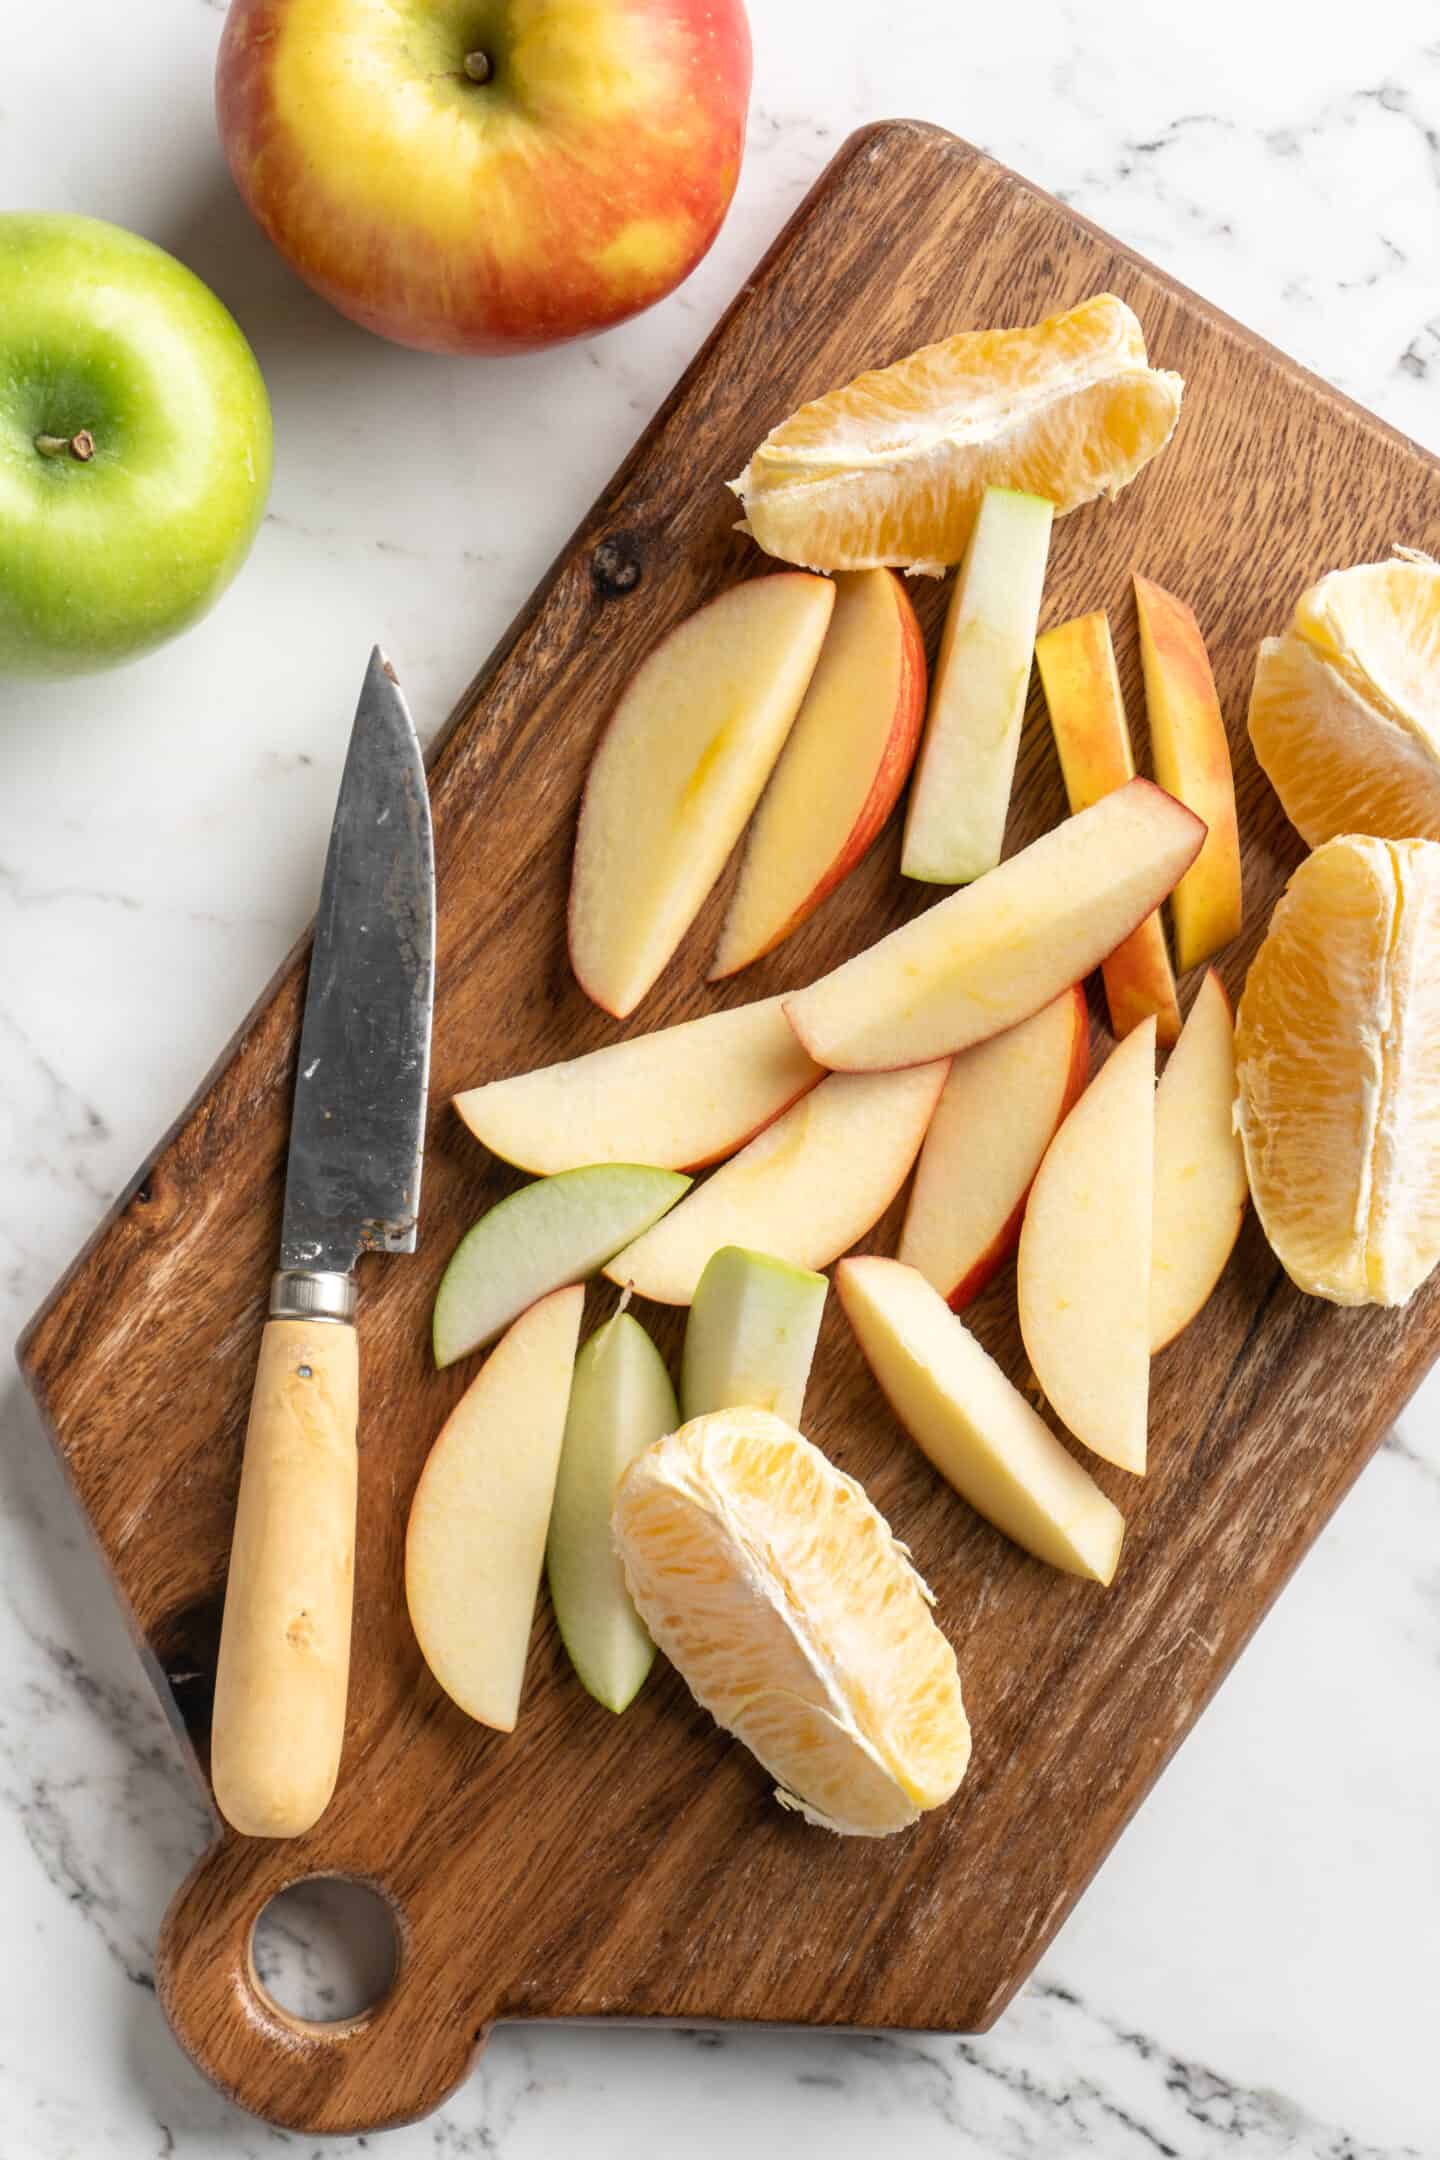 Overhead view of sliced apples and oranges on cutting board with paring knife